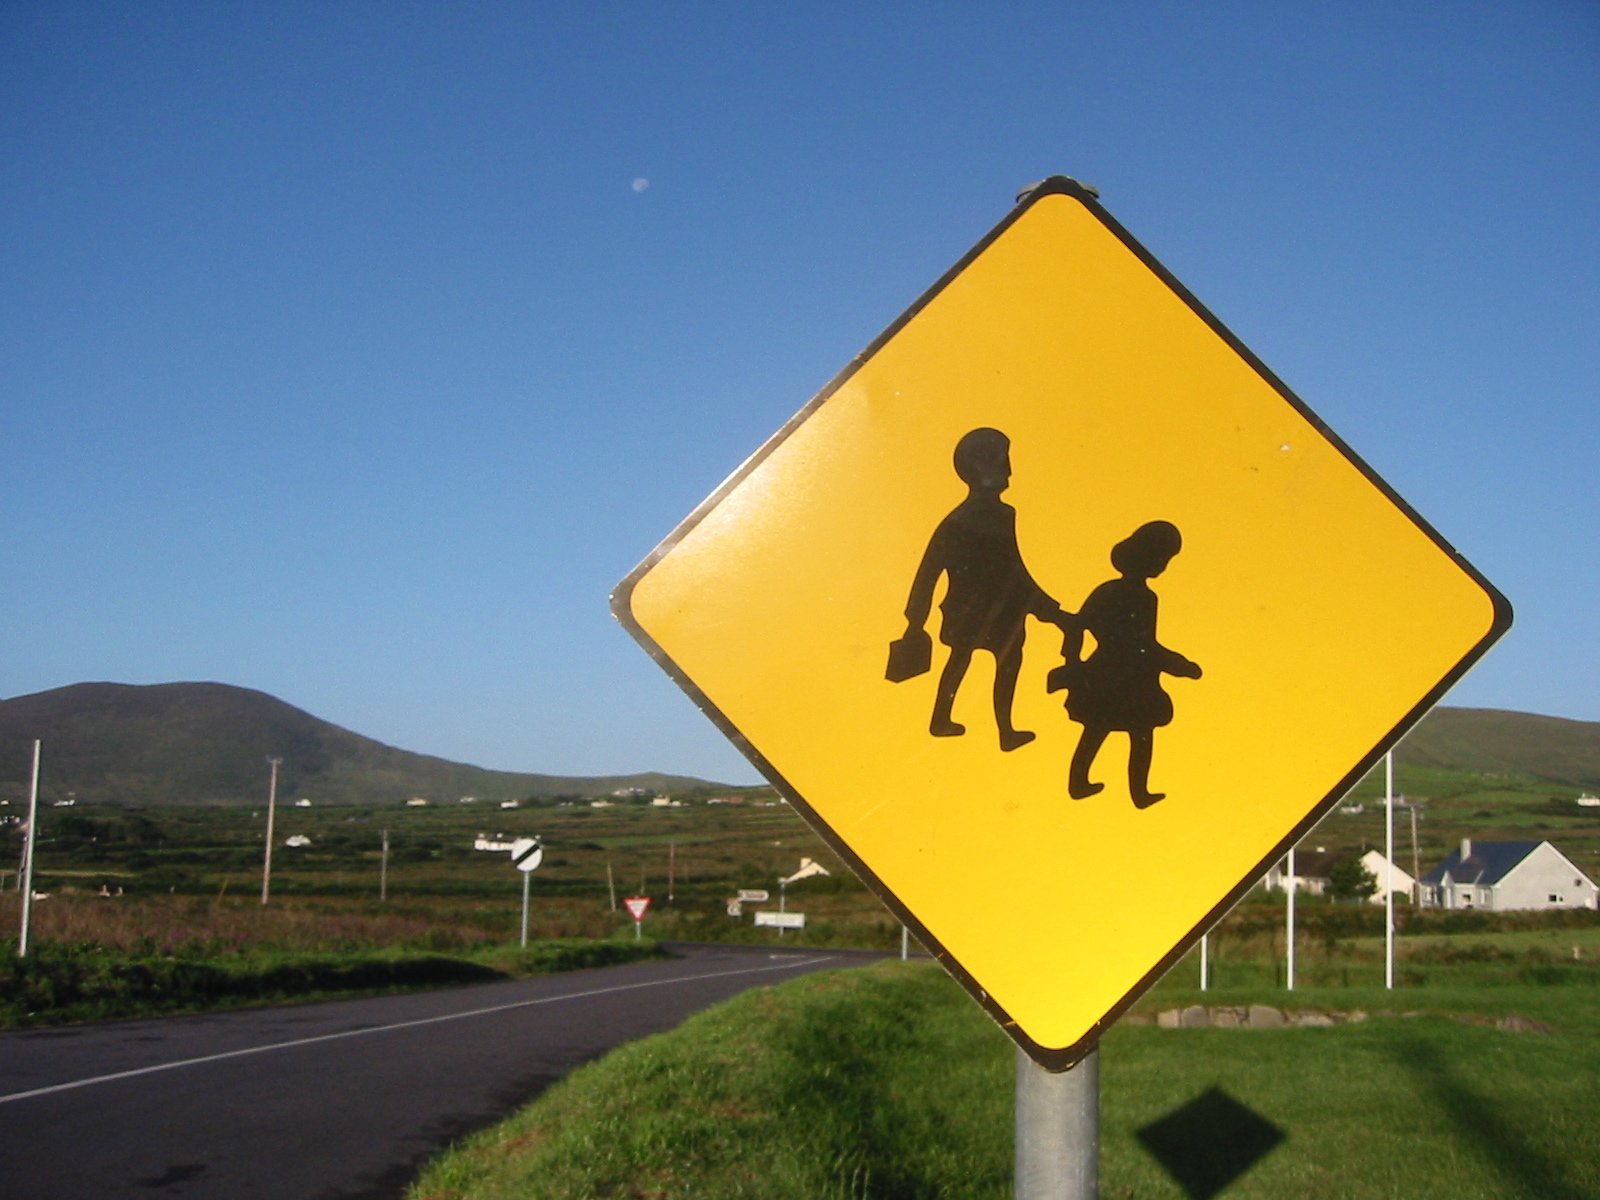 an image of a road sign that shows people crossing